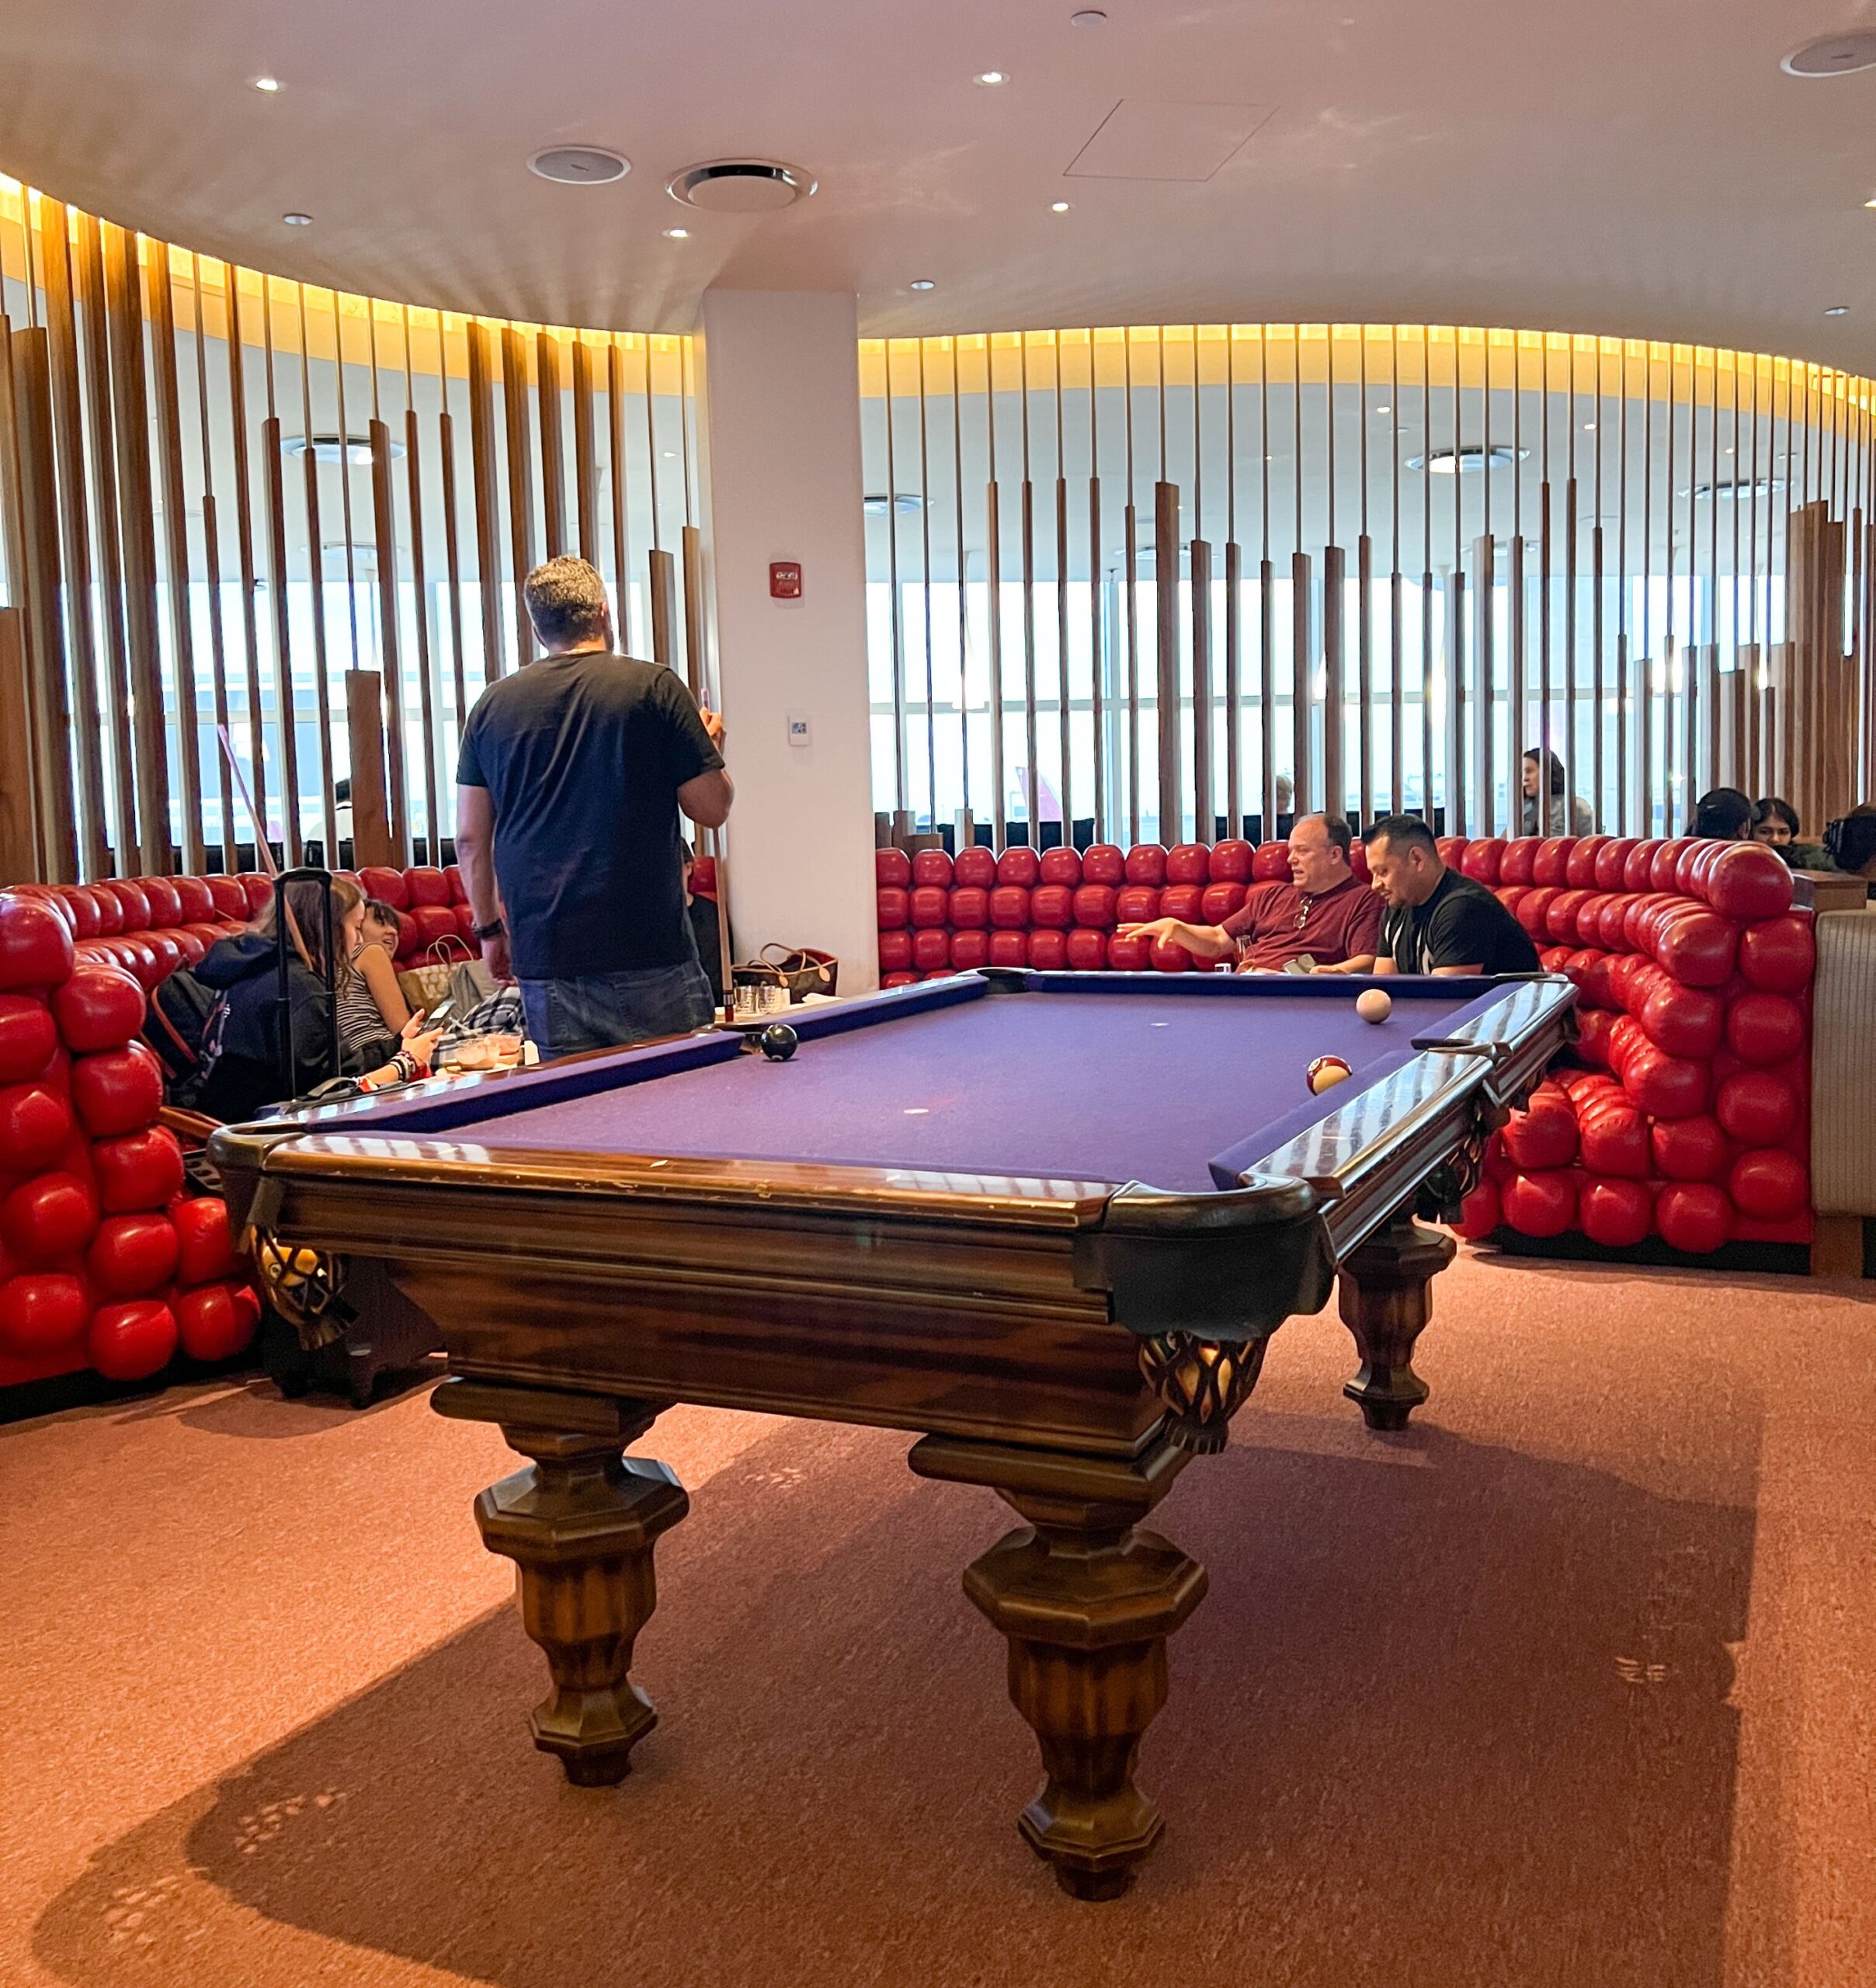 a pool table in a room with red seats